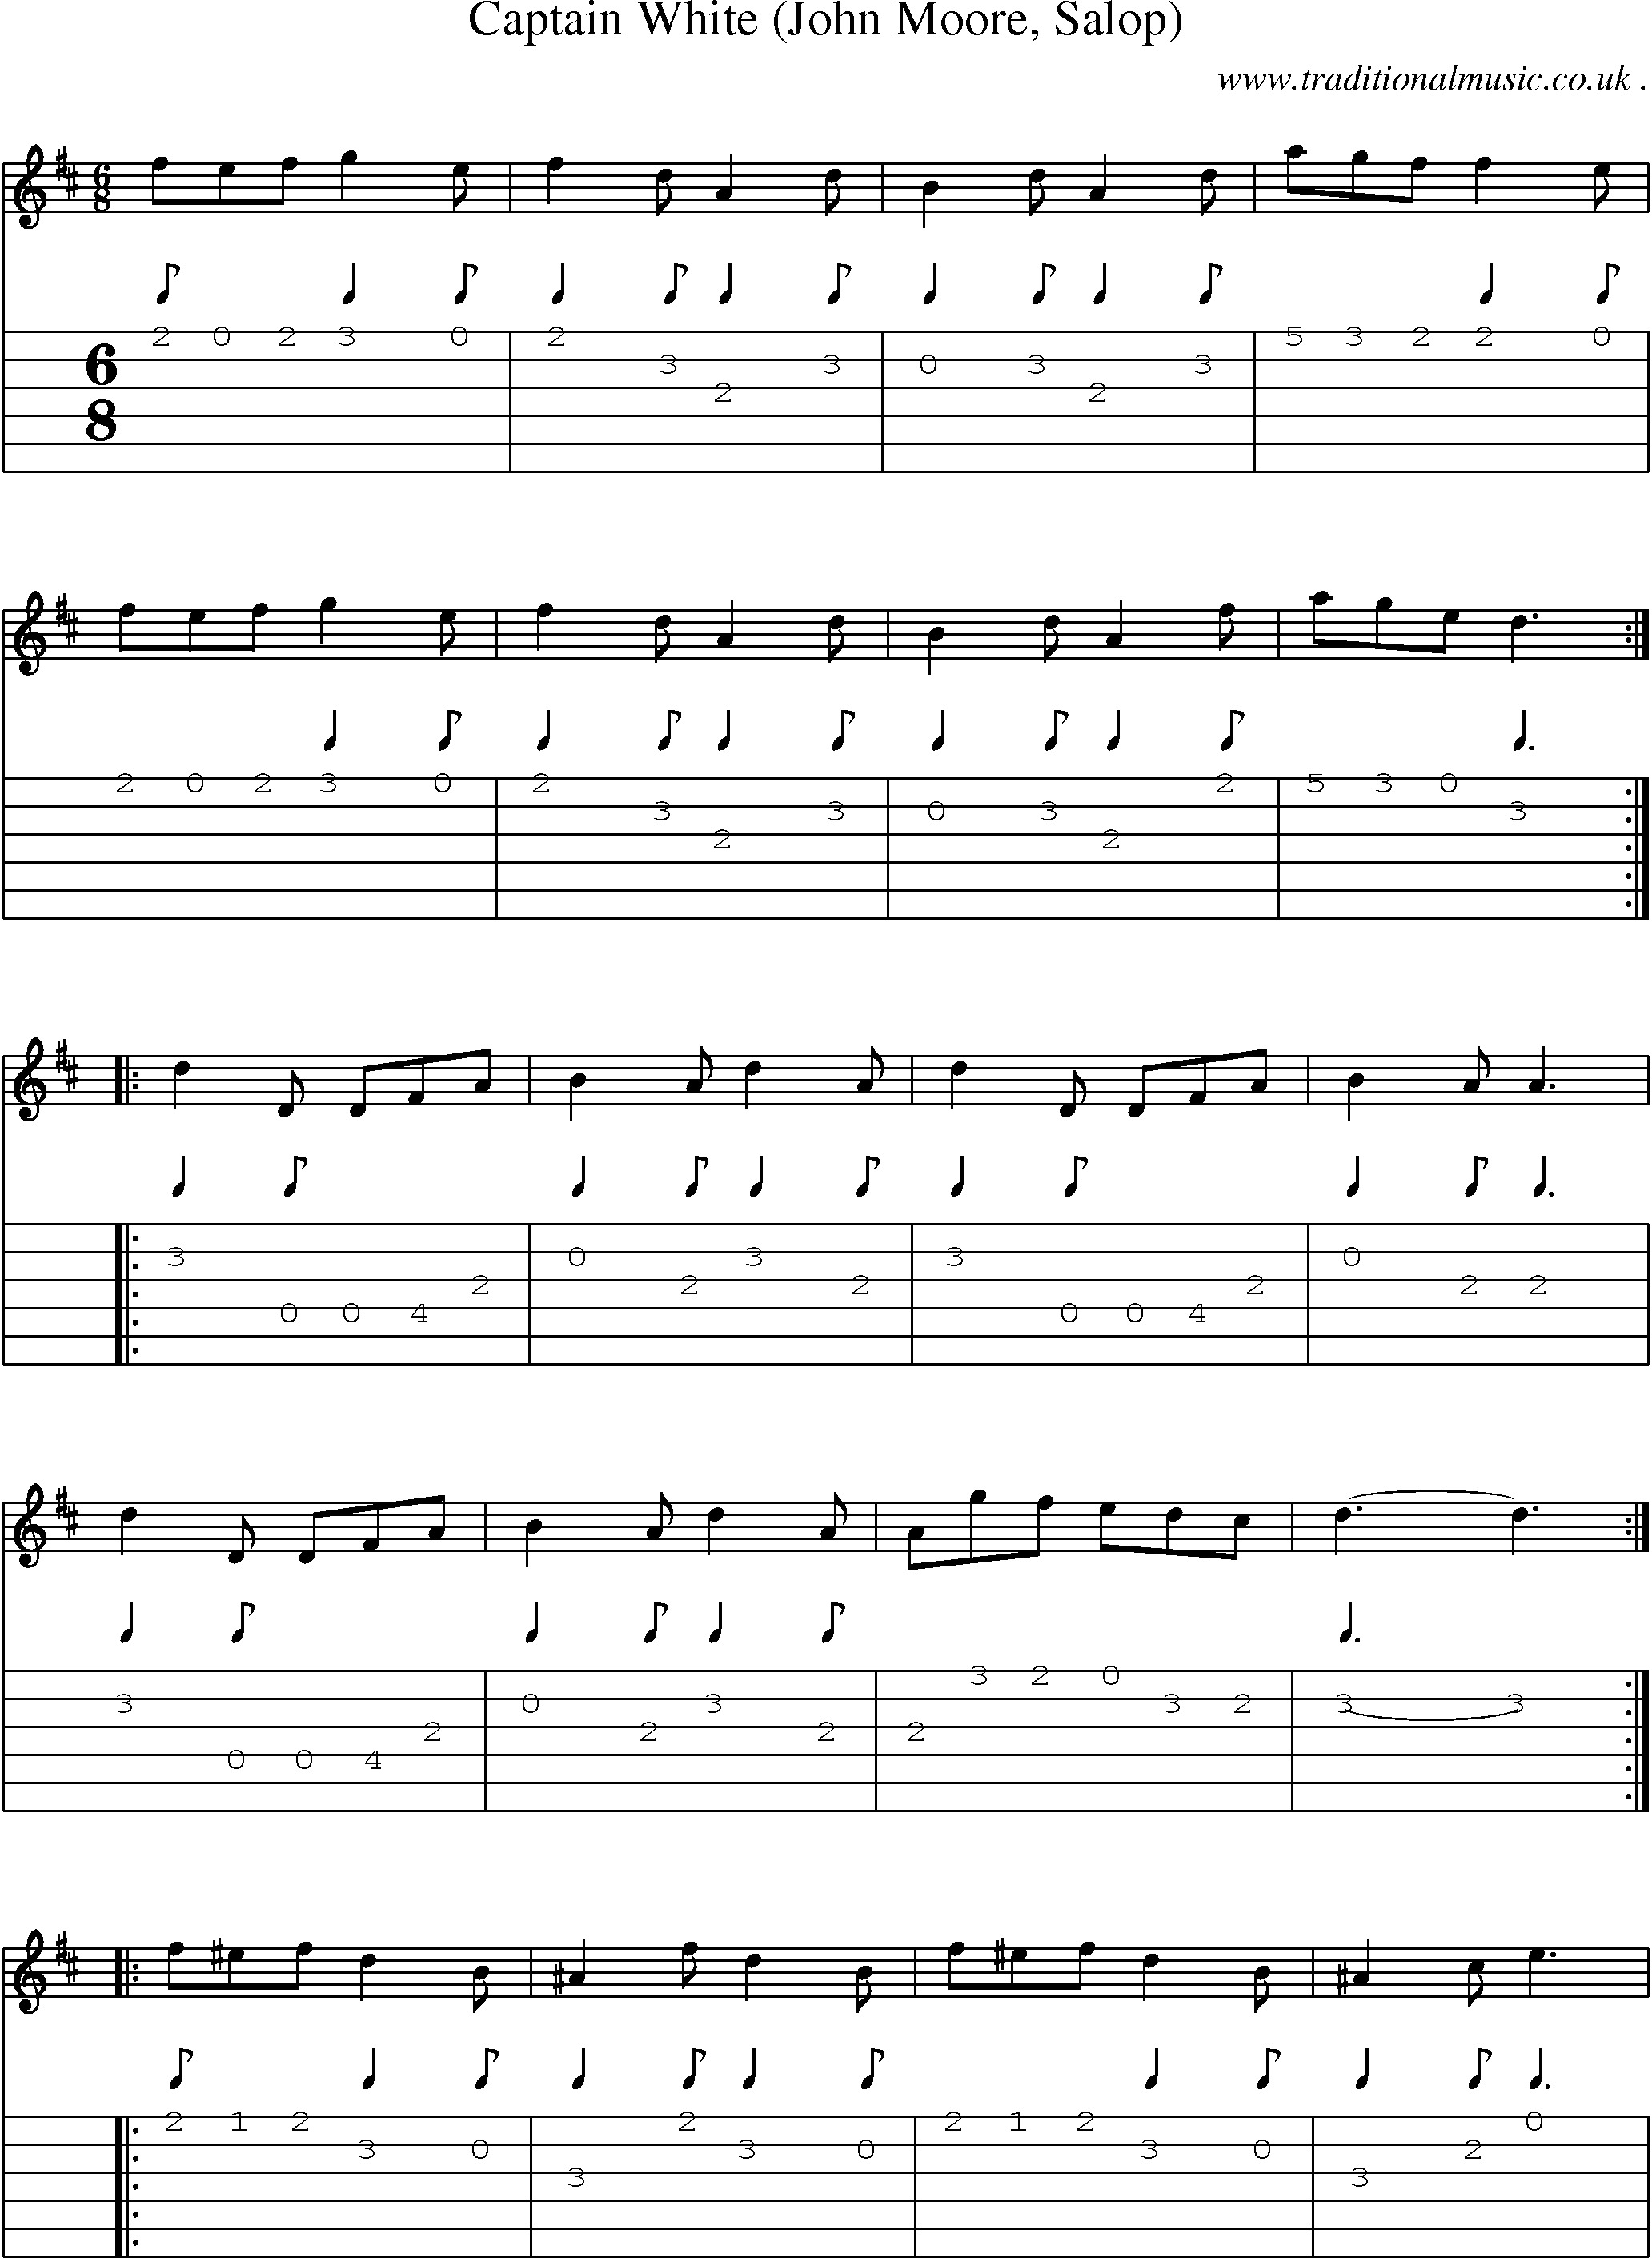 Sheet-Music and Guitar Tabs for Captain White (john Moore Salop)